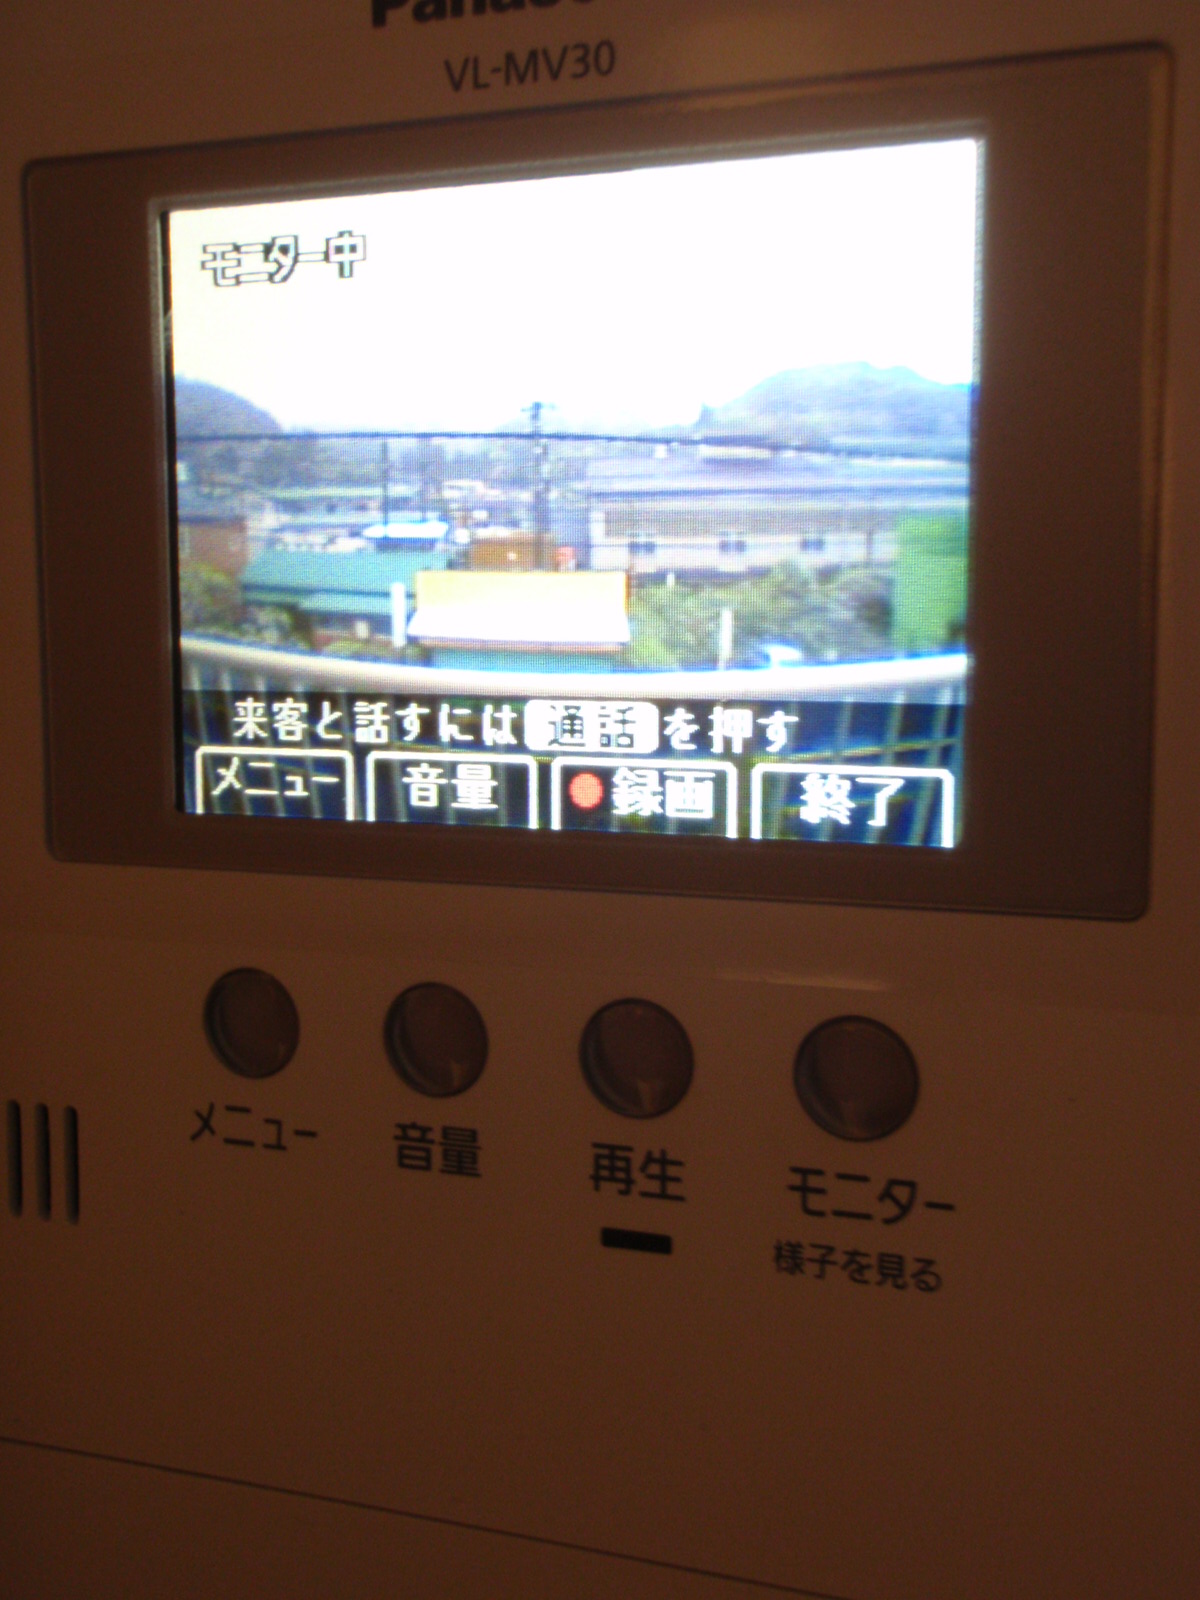 Security. Intercom with a monitor that can see the face of the visitors